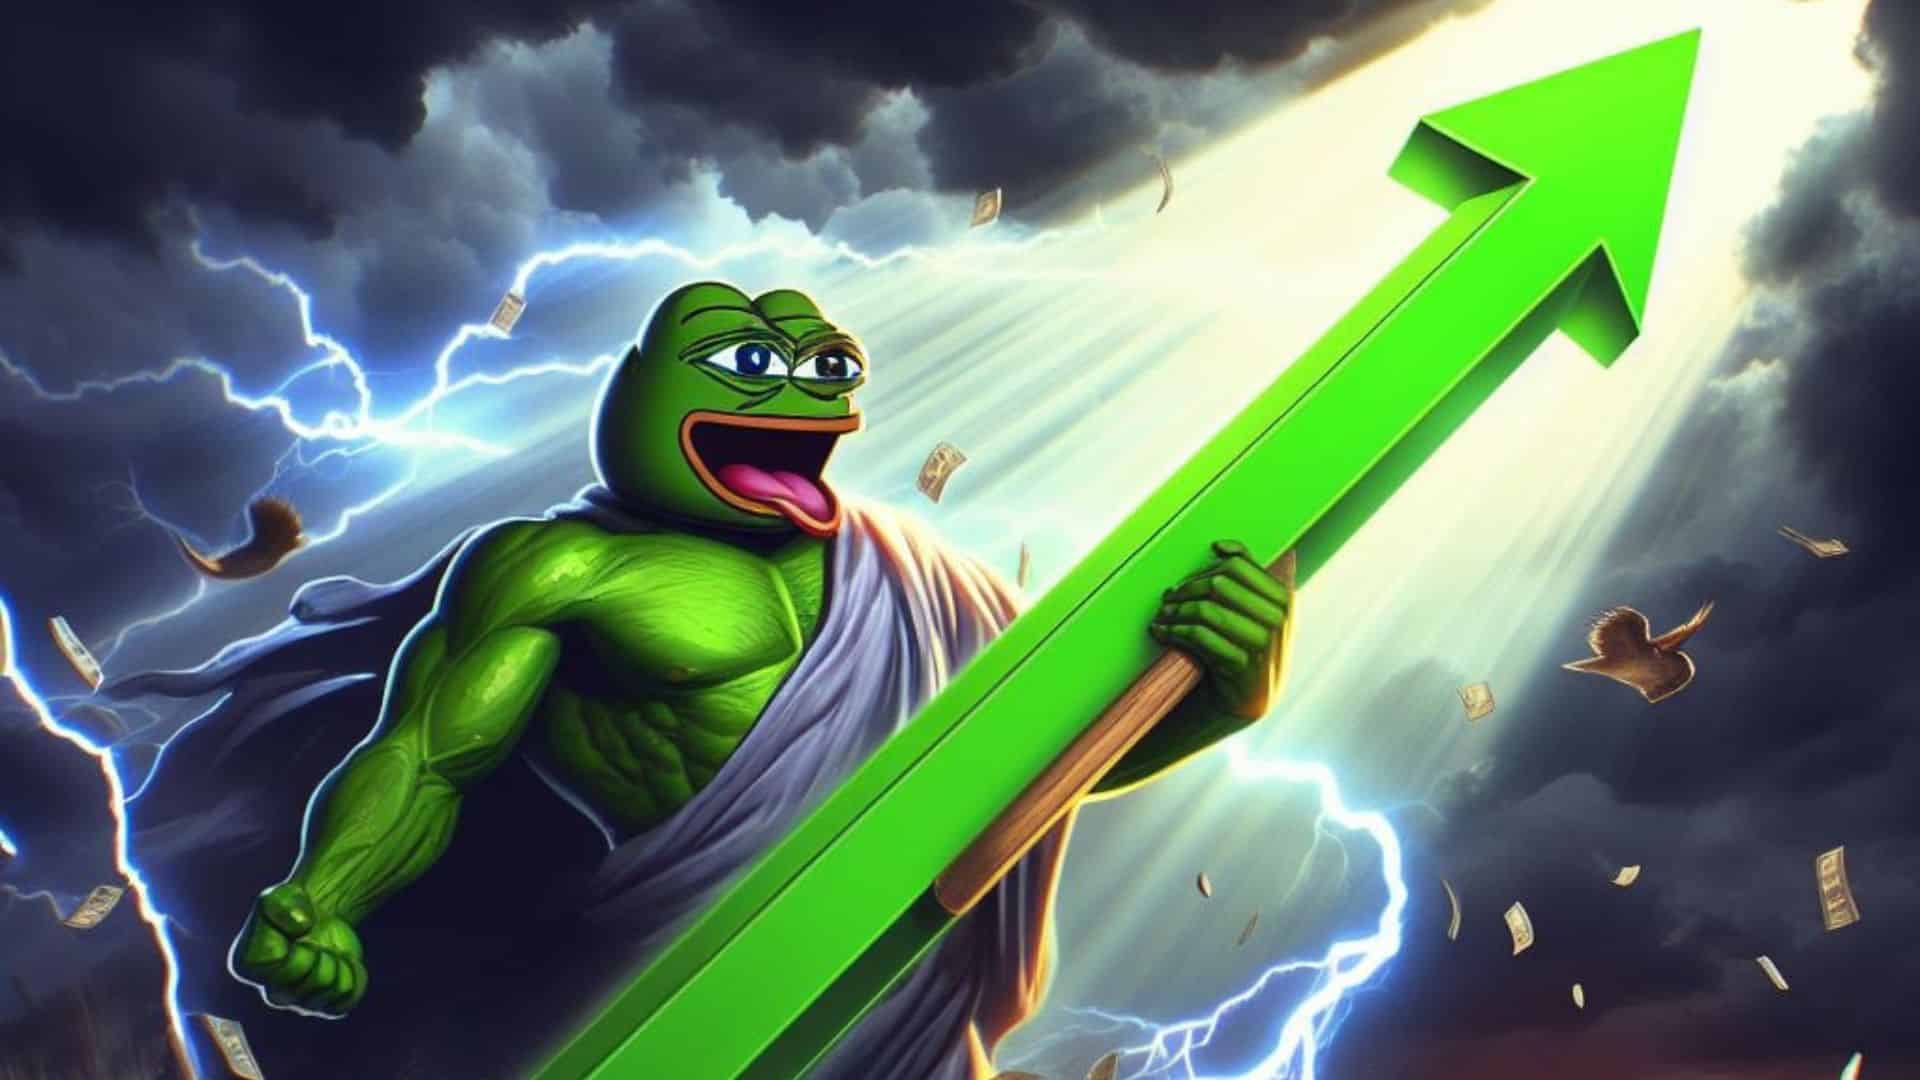 Pepe Price Prediction: PEPE Plunges 5% As Investors Flock To This Pepe 2.0 Meme Coin As It Blasts Past $6.5 Million